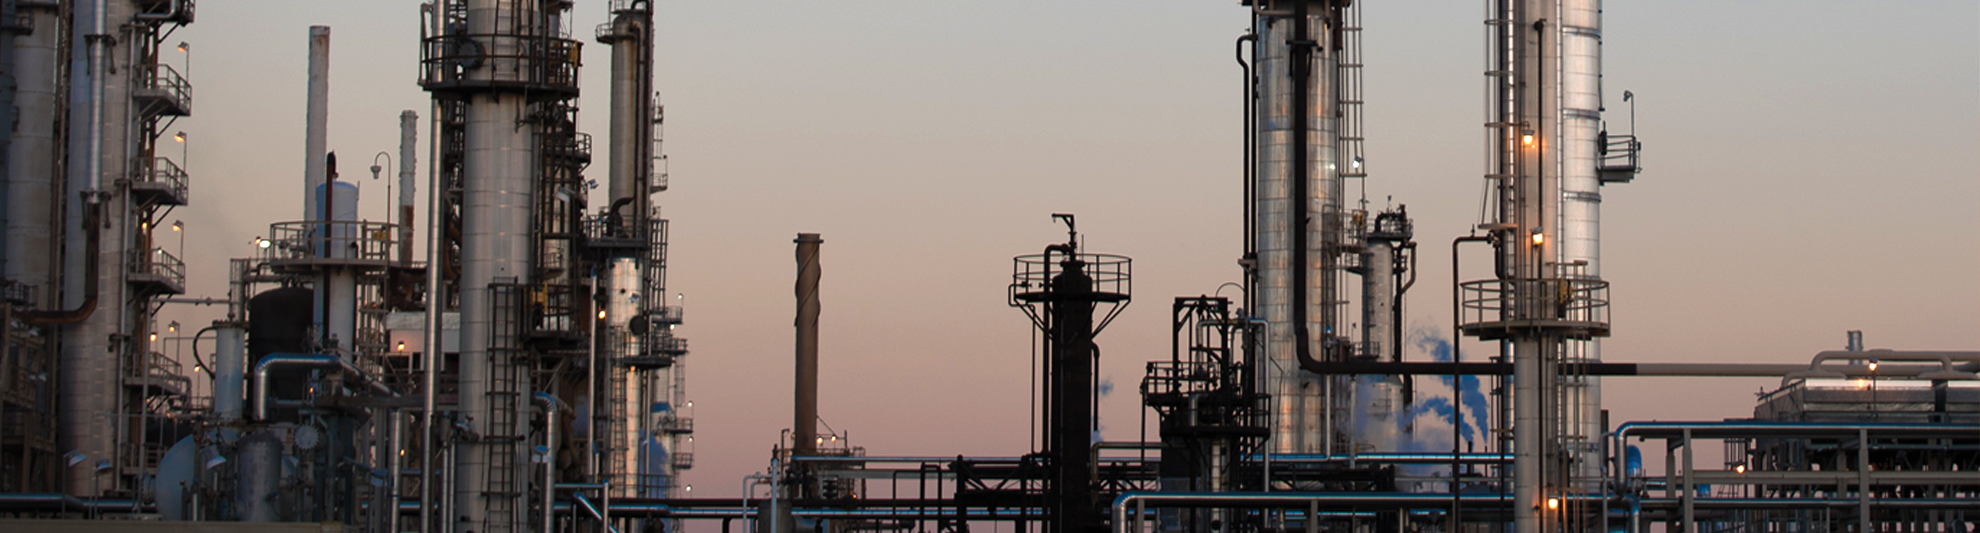 image of an oil refinery in artesia, new mexico